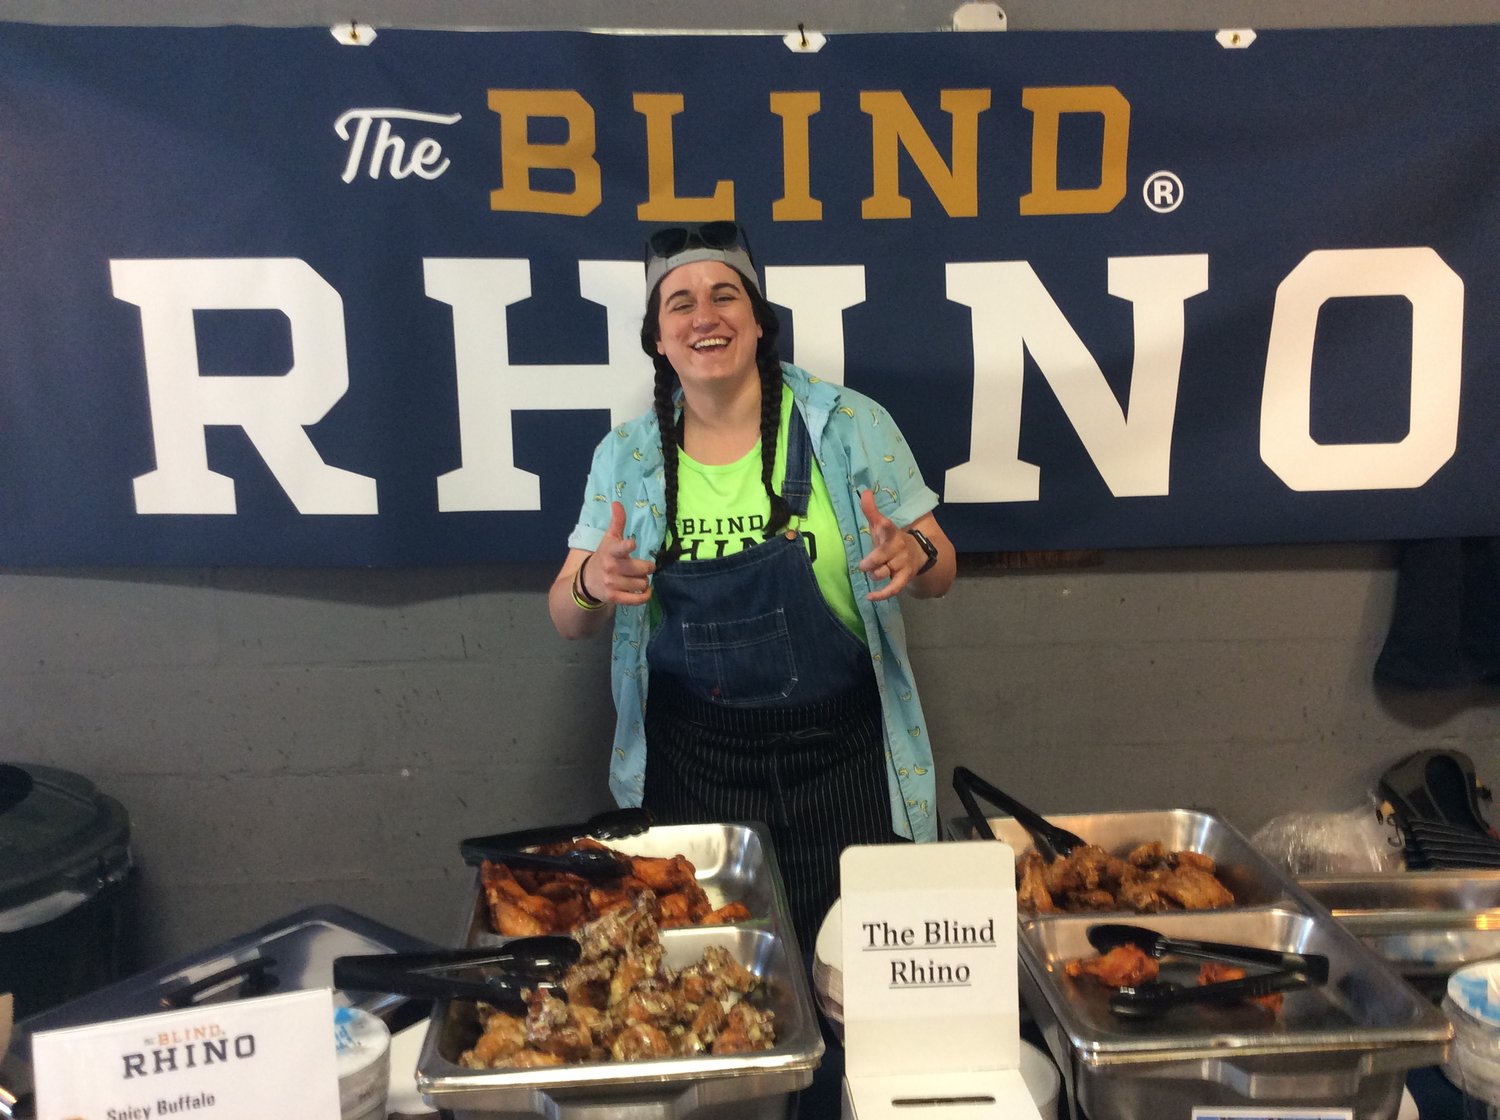 Blind Rhino came from Connecticut to enter its wings in the contest.